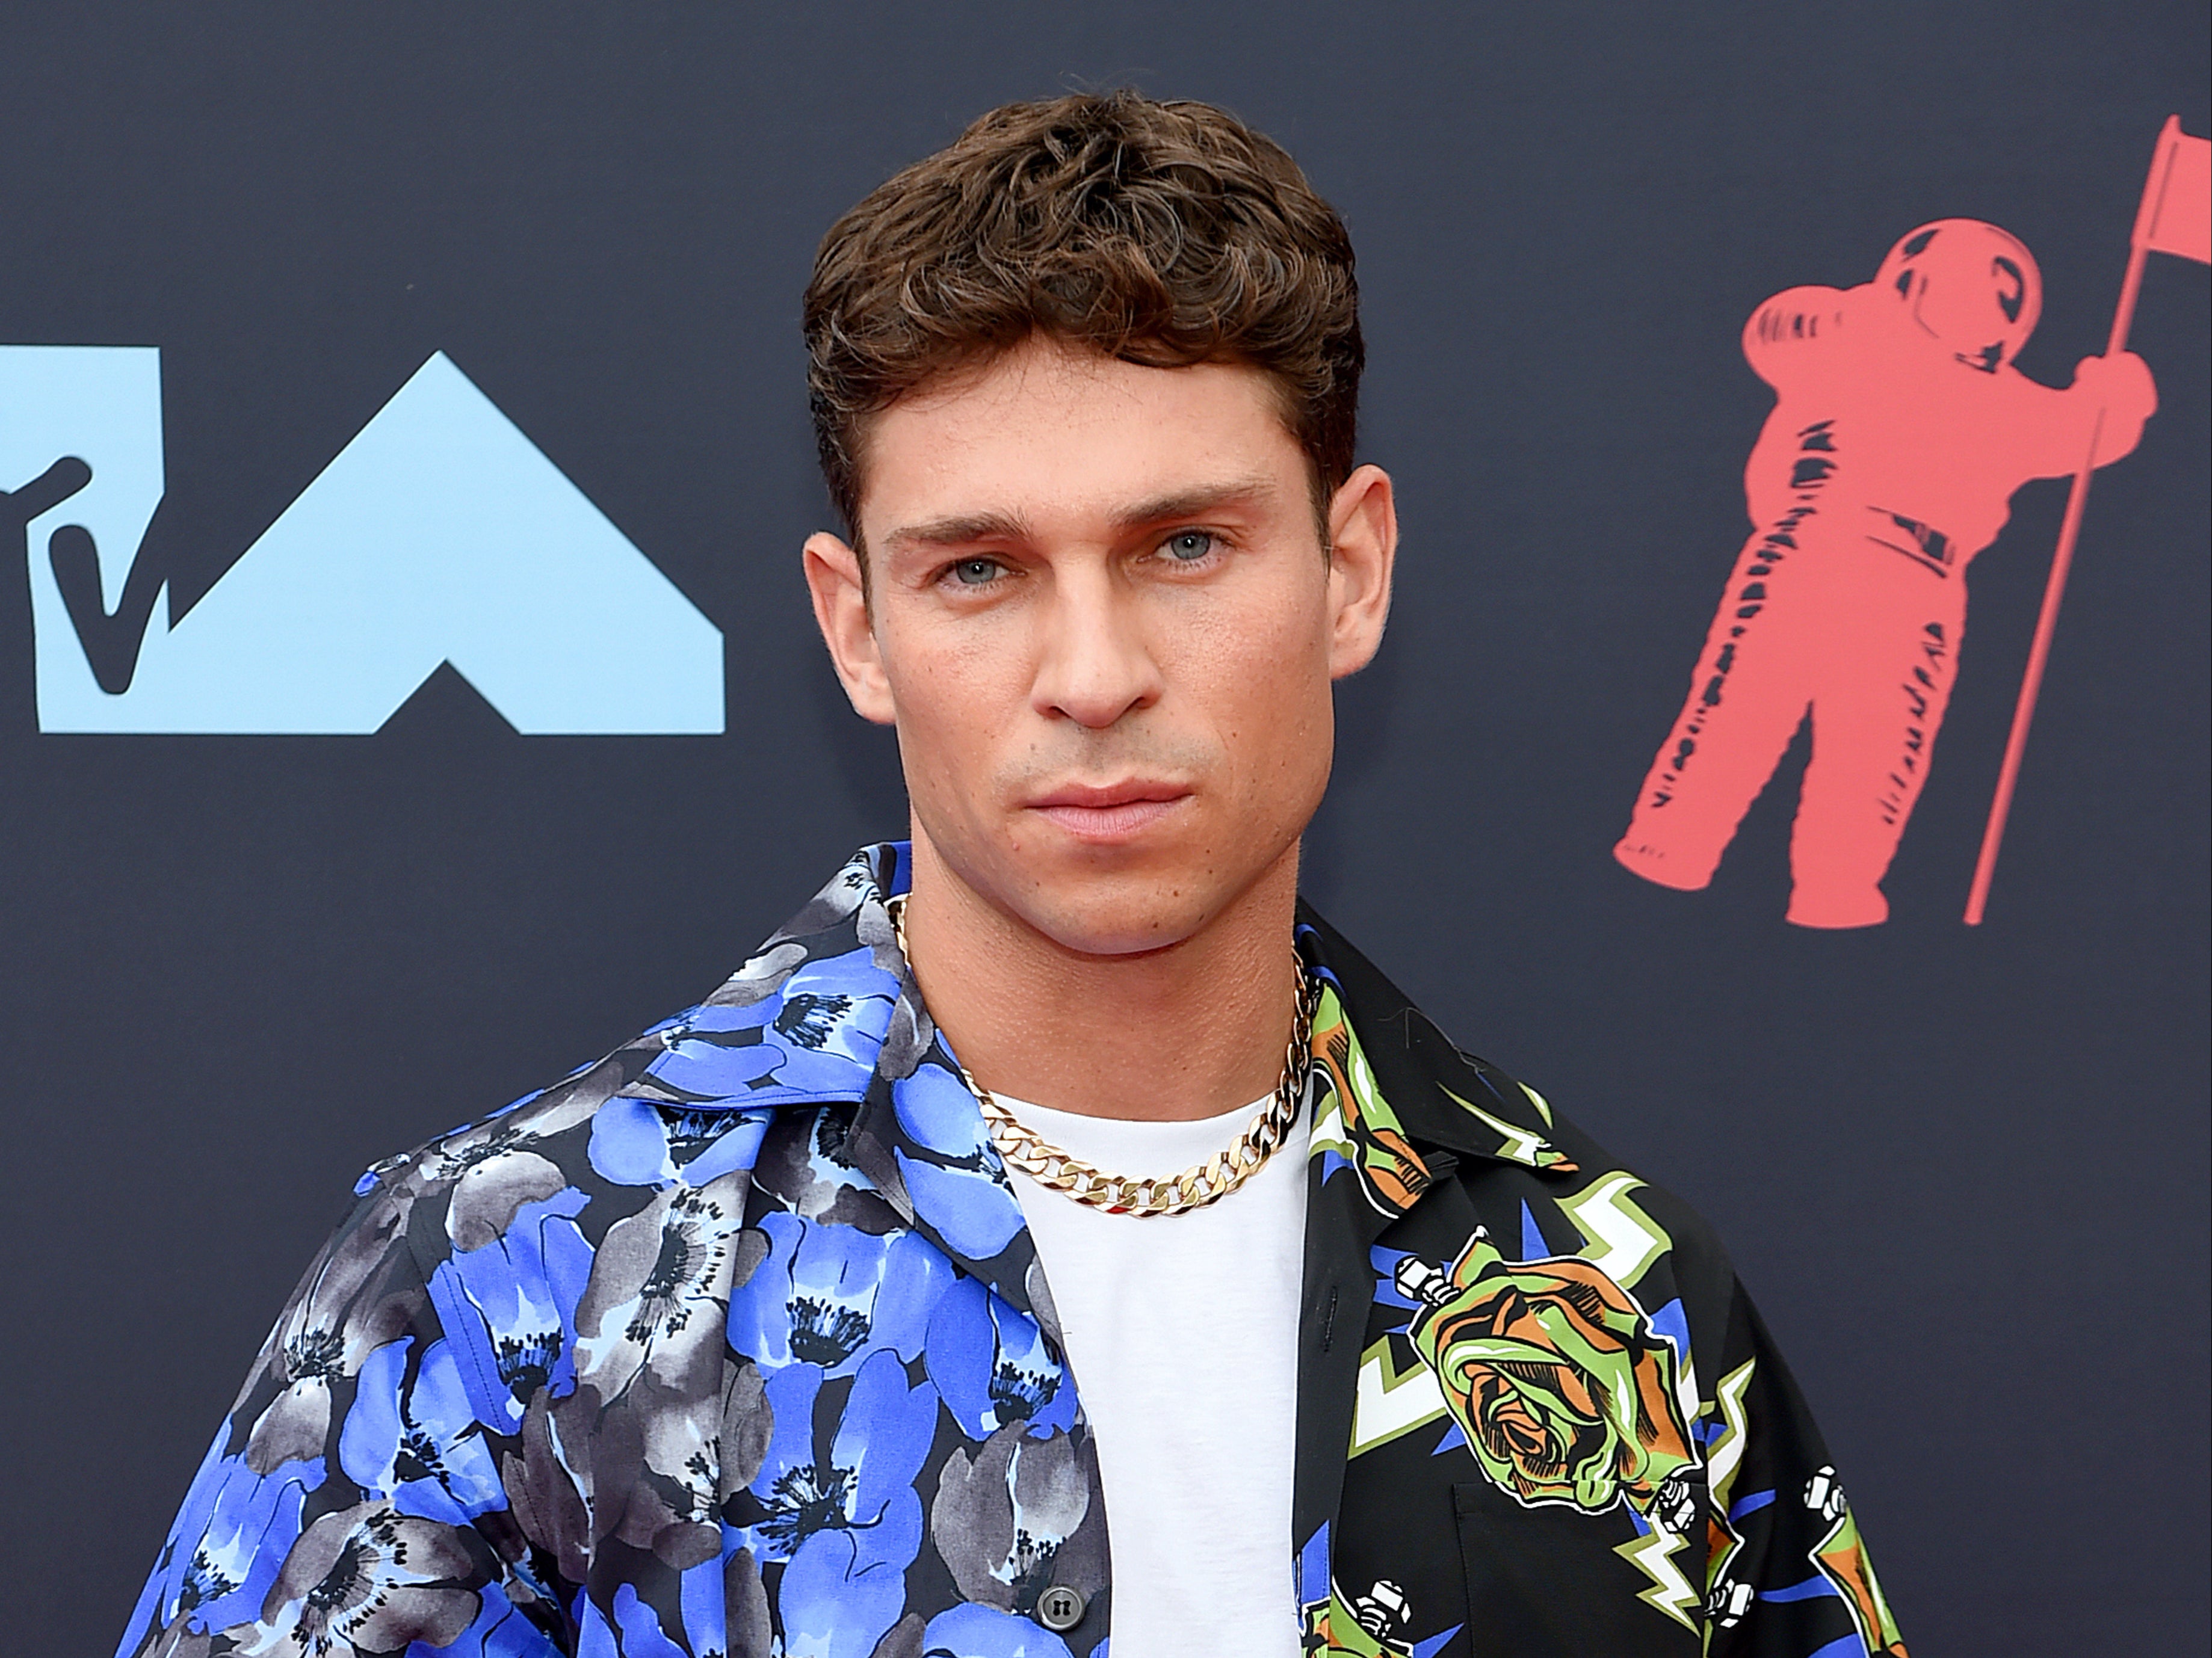 Joey Essex has spoken about his struggles with depression and anxiety